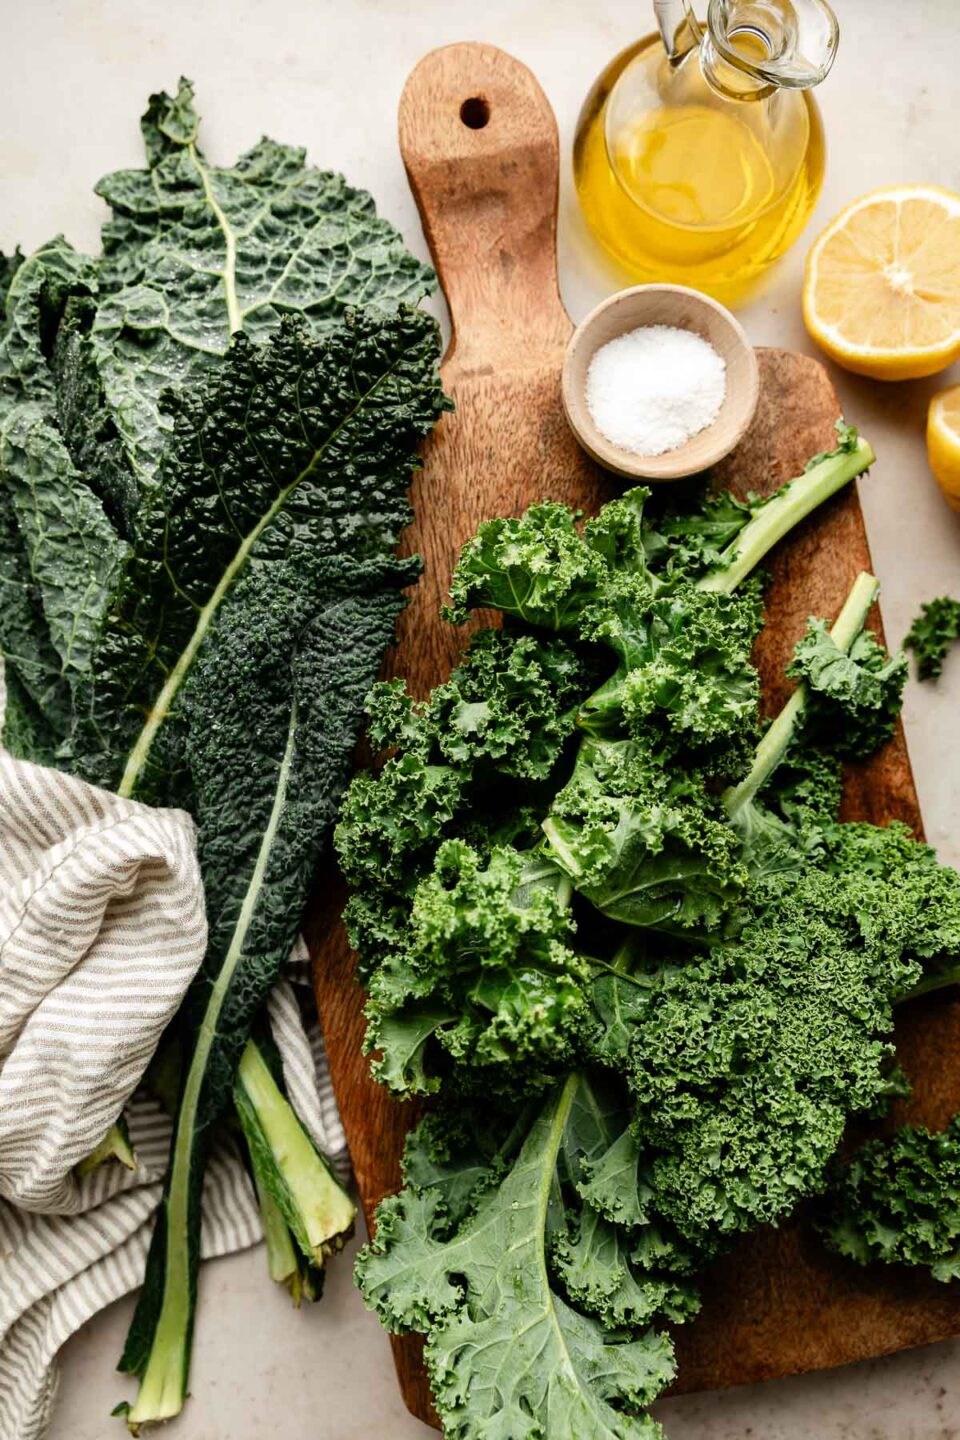 An overhead shot of kale, a jug of olive oil, halved lemons and a small bowl of sea salt on a wooden board and an off-white surface.